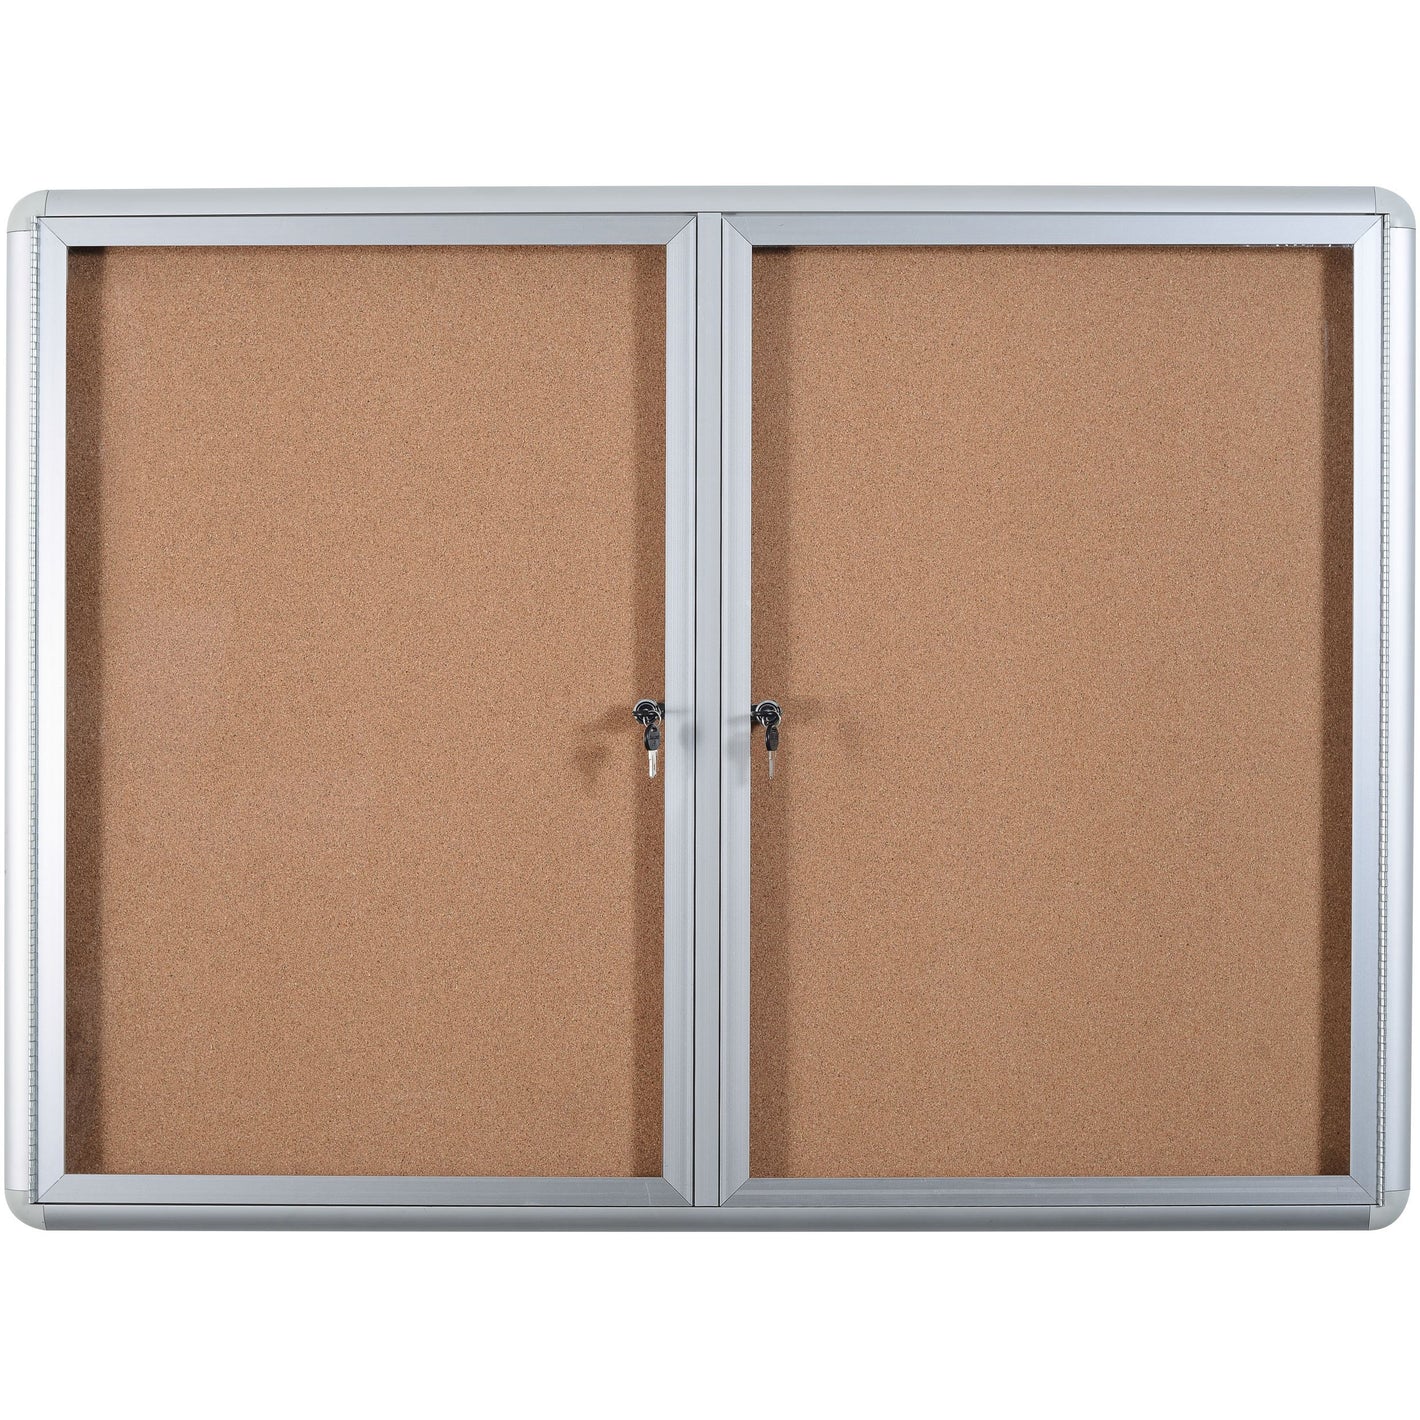 VT640101720 Enclosed Locking Swing Doors Cork Bulletin Board, Indoor Wall Mounting Message Corkboard, 36" x 48", Aluminum Frame by MasterVision